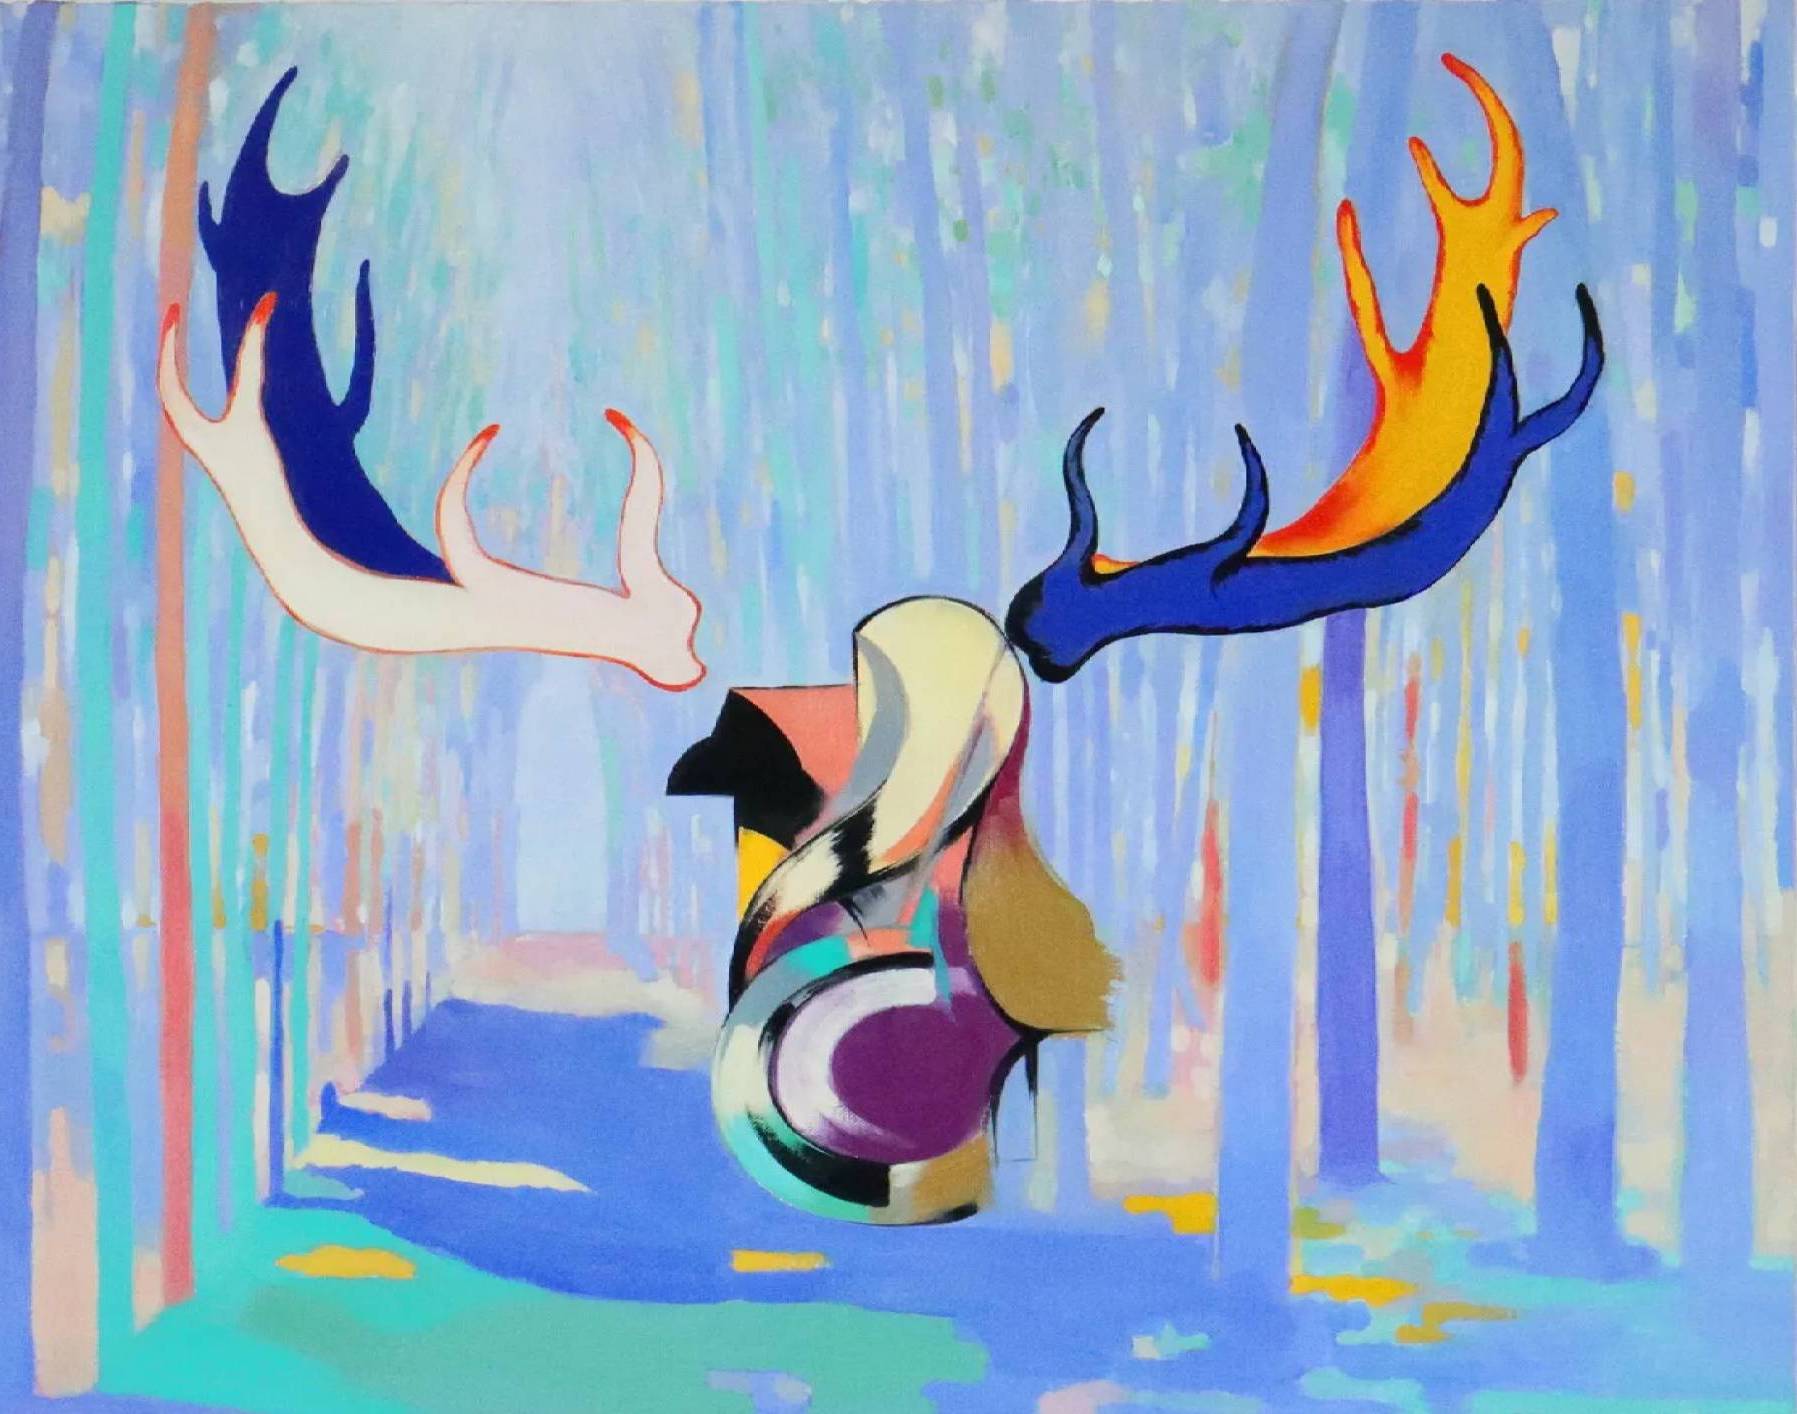 An abstract painting of a deer head and antlers in a forest. The forest is pastel blue and turquoise. The deer head is made up of various shapes, and is darker than the forest.